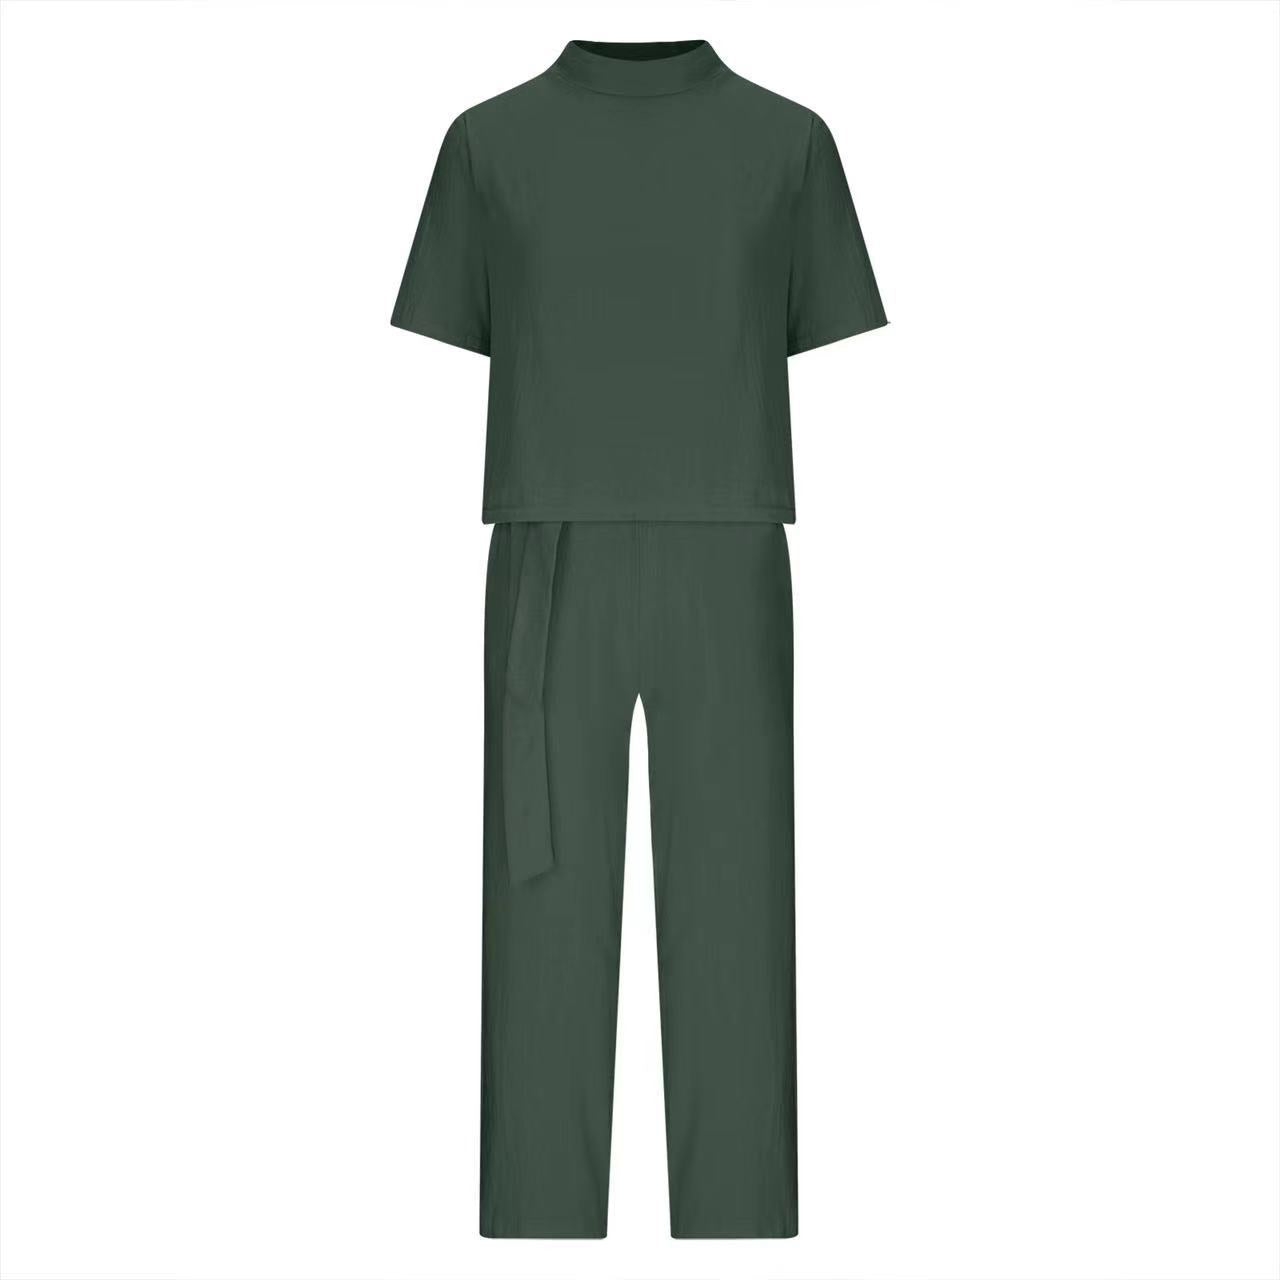 NTG Fad SUIT Two-piece short-sleeved crew neck trousers set